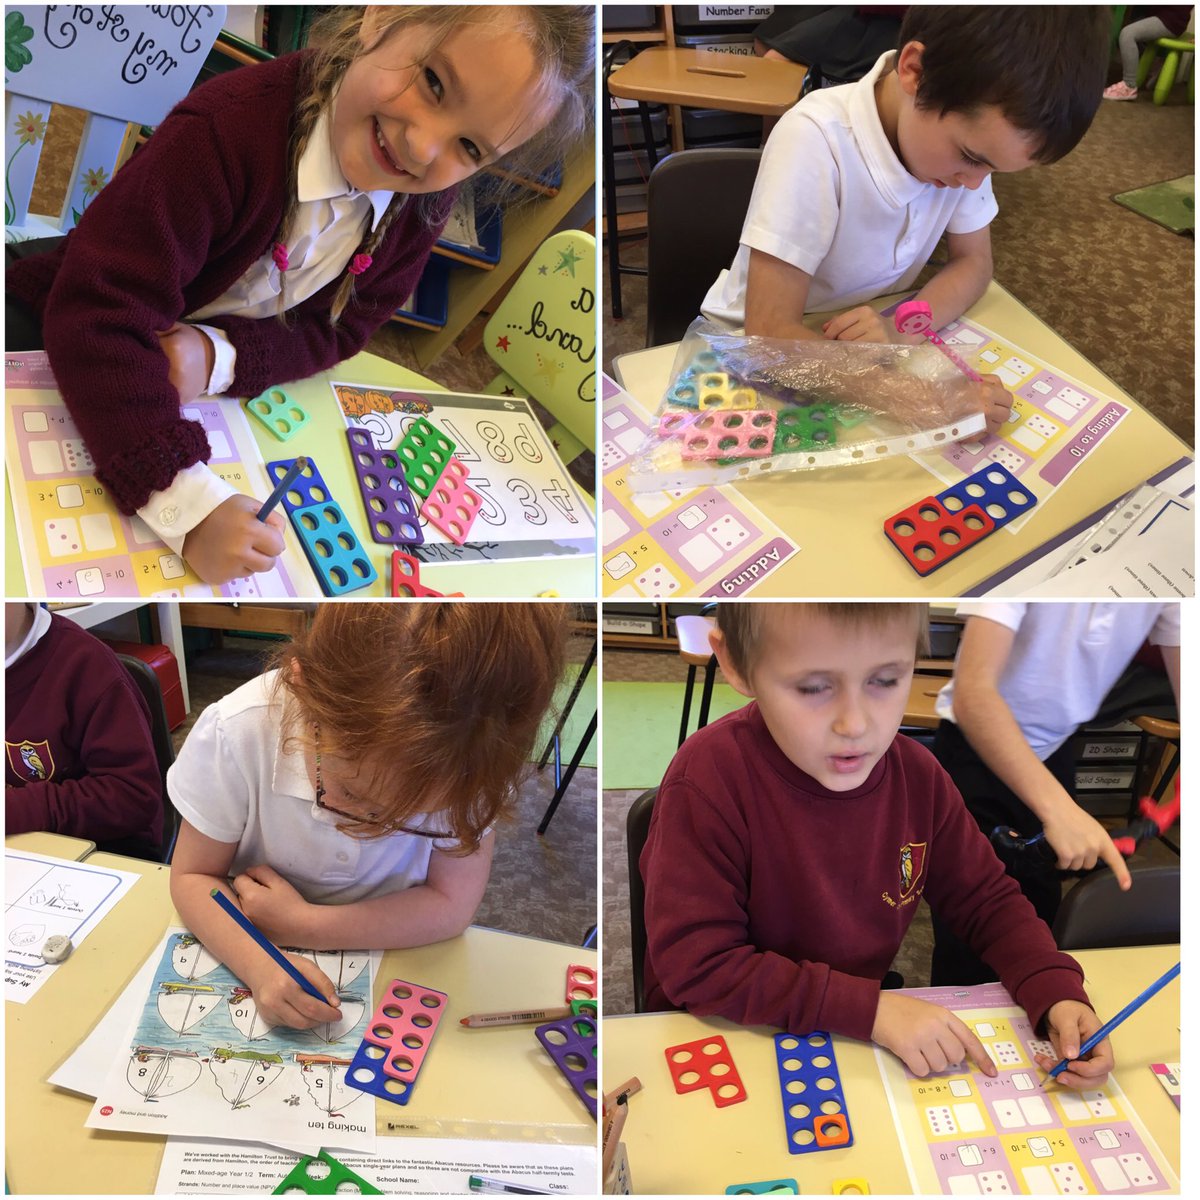 We've been using Numicon to help us with our numbers bonds to 10 this week @Numicon #R12 #numberbonds